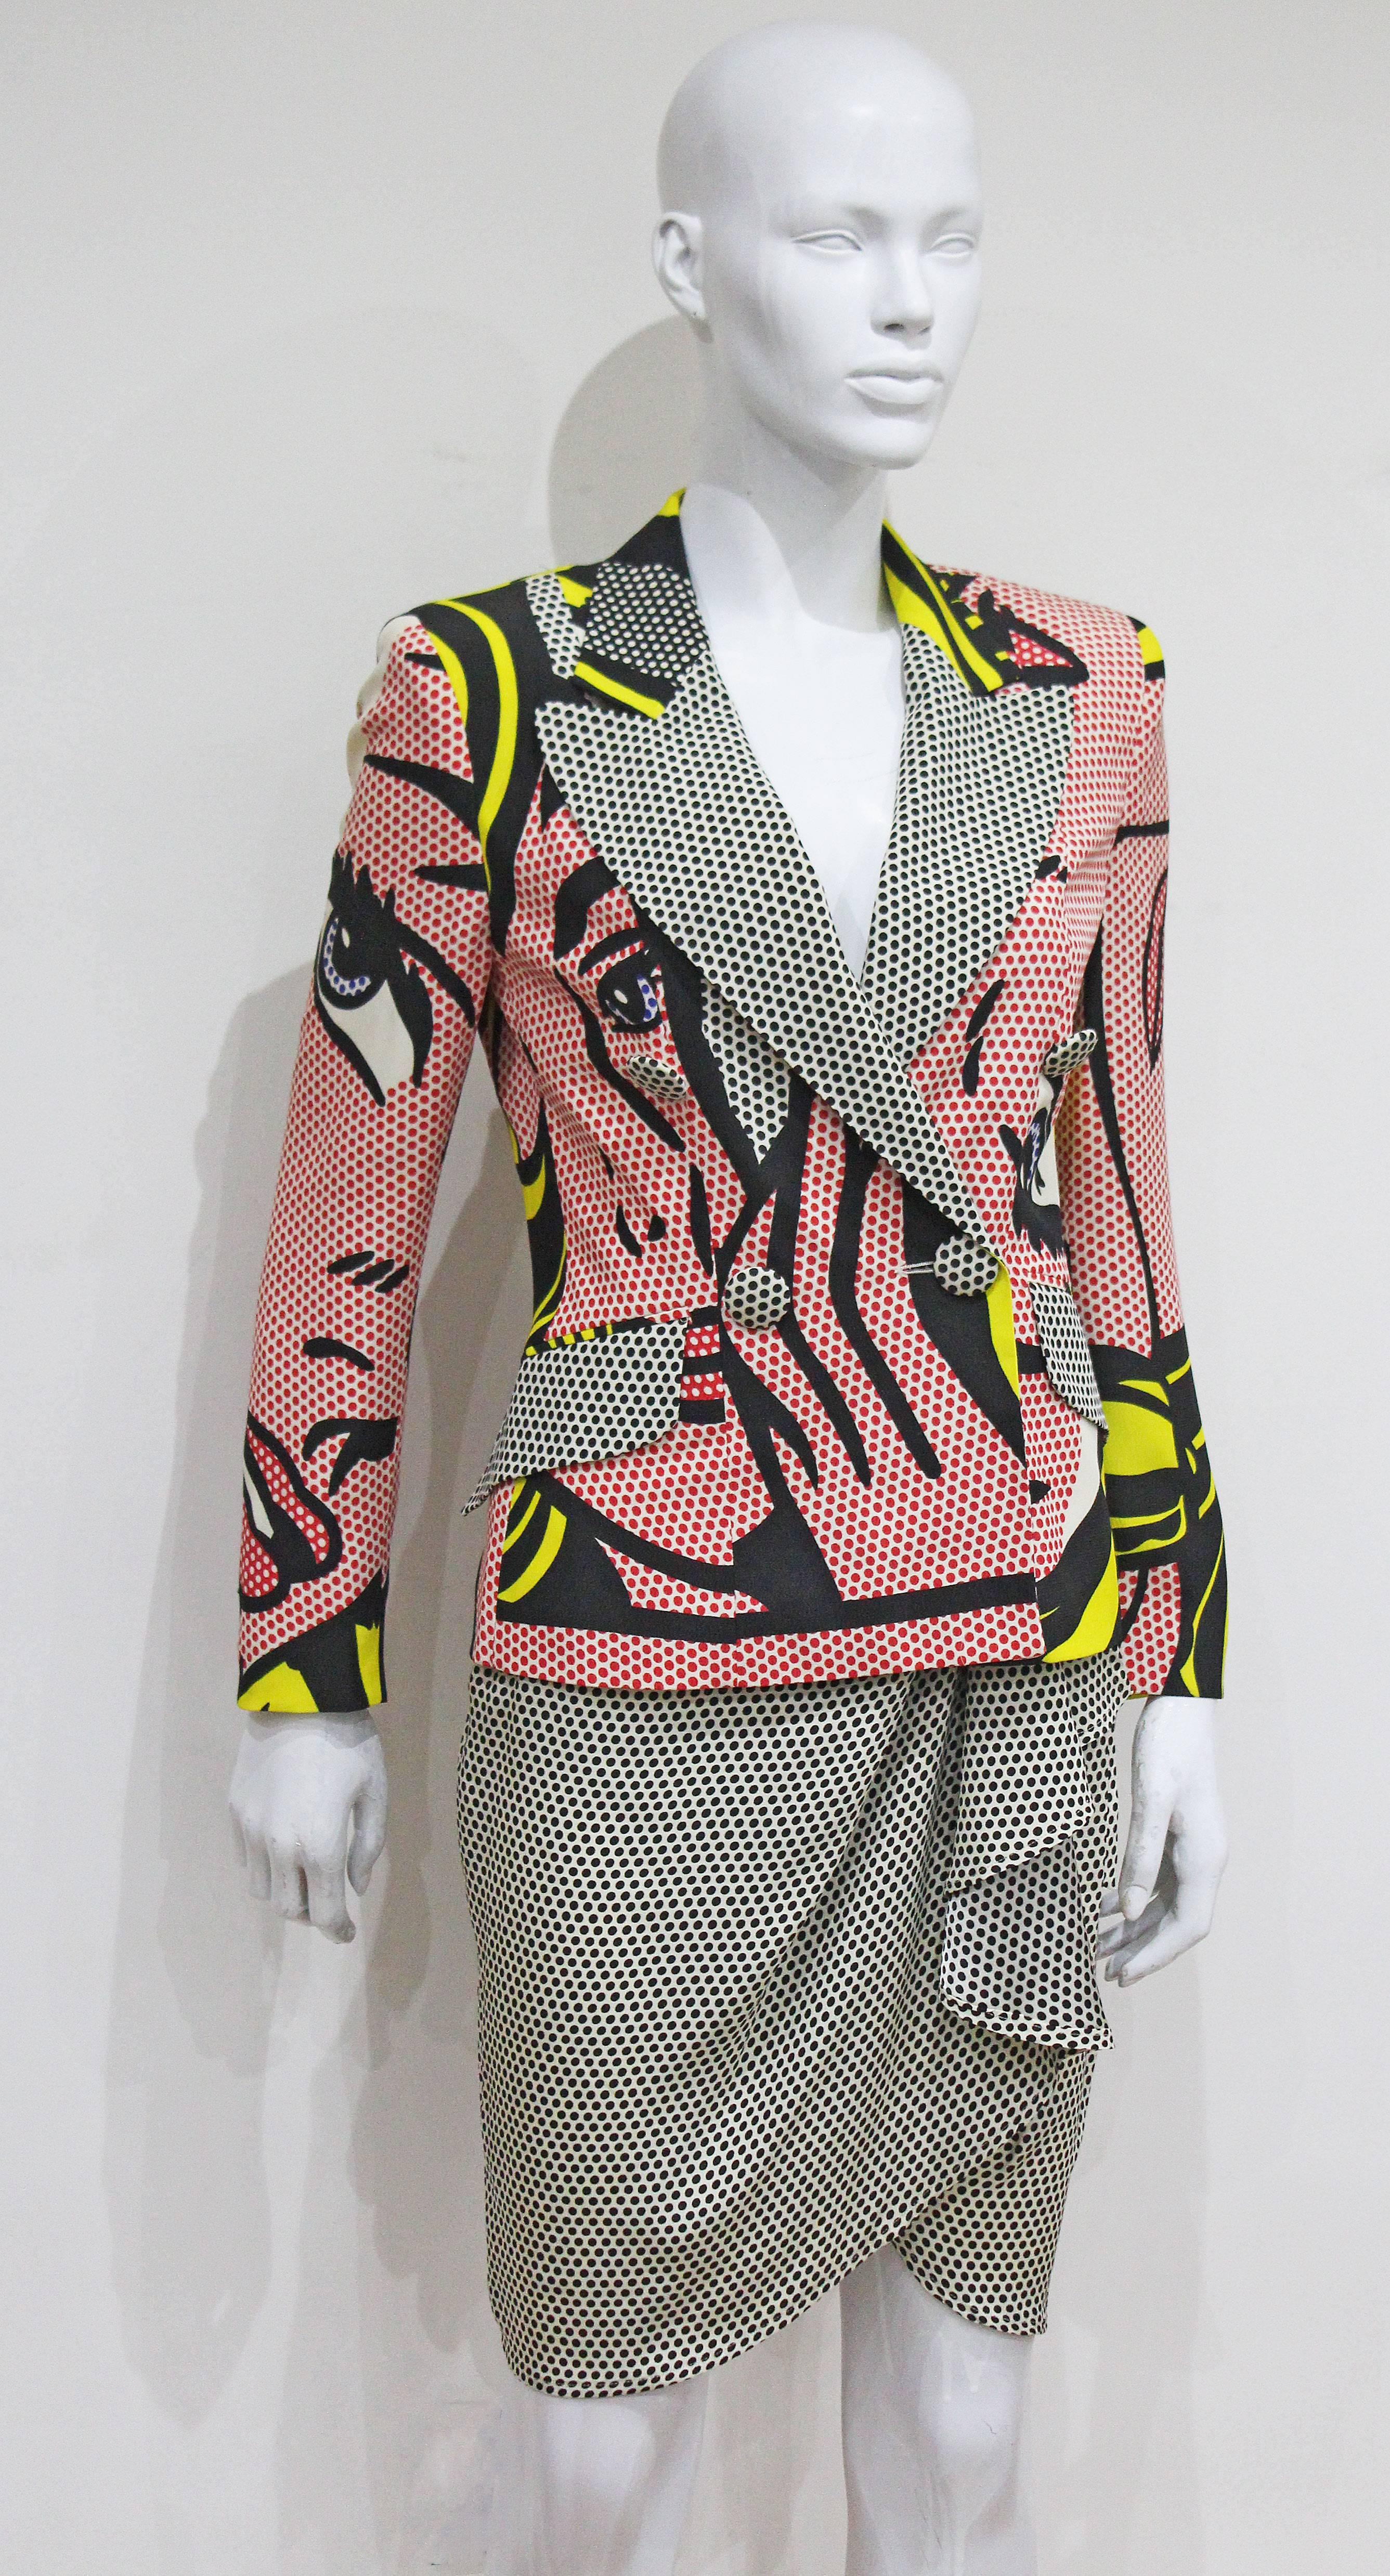 A museum worthy Moschino skirt suit from the Spring/Summer 1991 collection. The suit features the iconic Roy Lichtenstein 'M-Maybe' print throughout. The blazer is tailored, double-breasted and features a silk scarf style lining which is dated. The